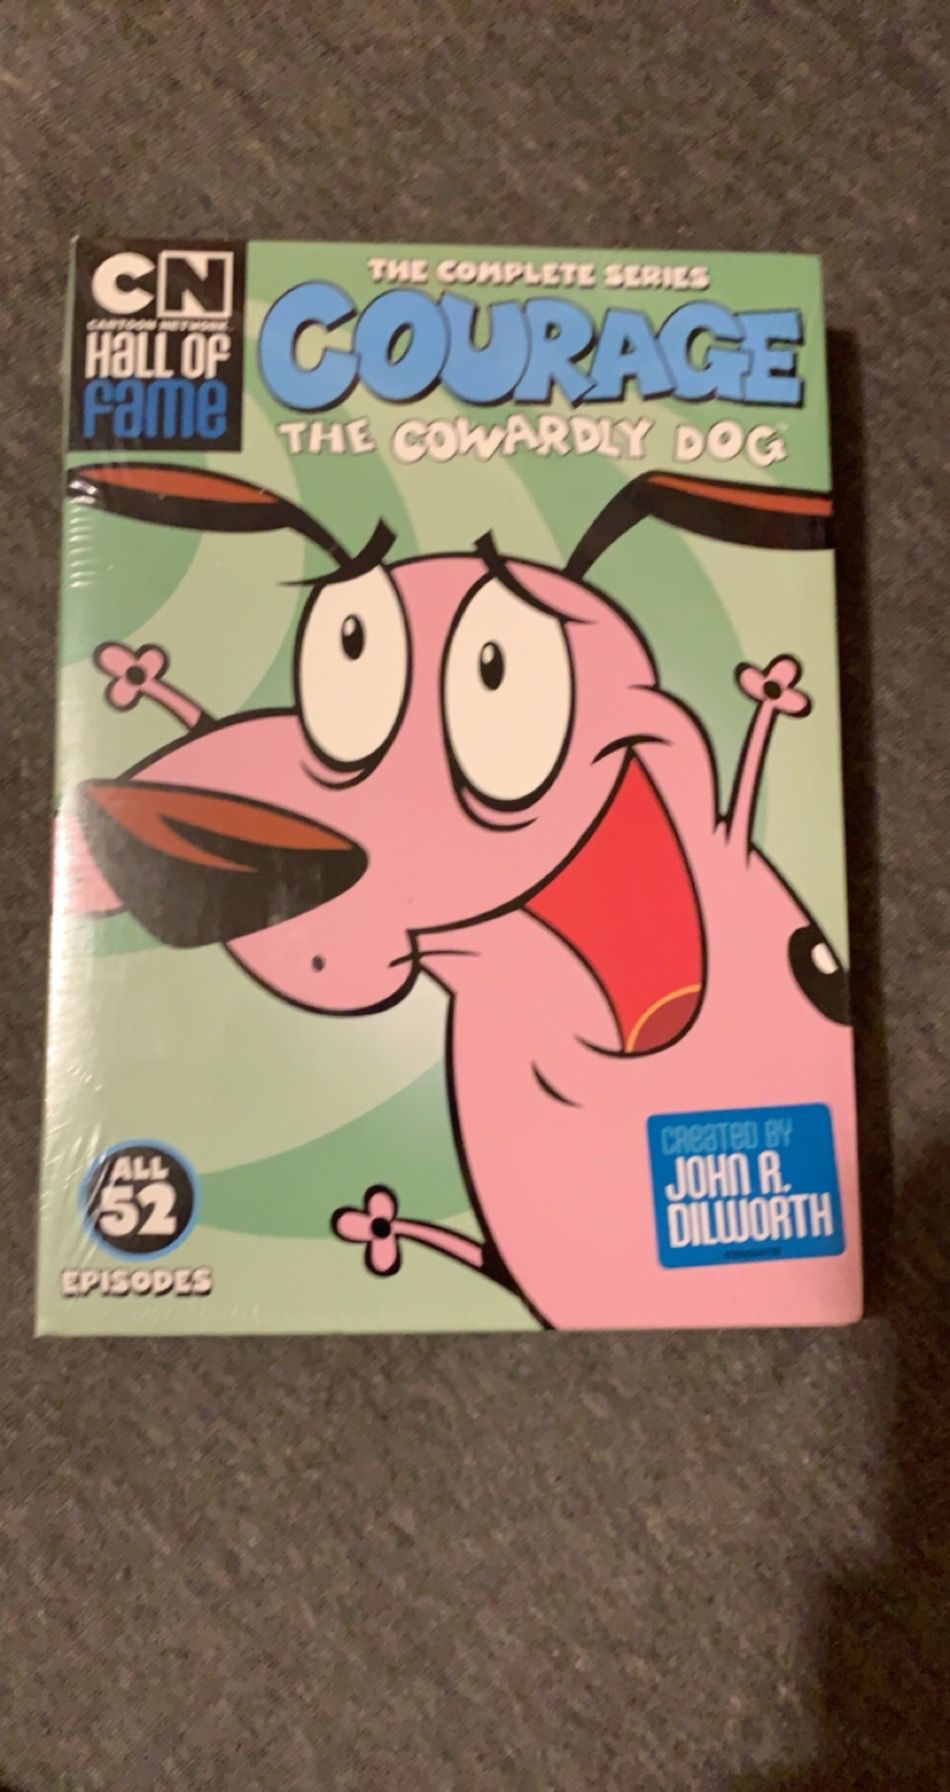 The complete Series Courage The Cowardly Dog, and How the Grinch Stole Christmas DvD film